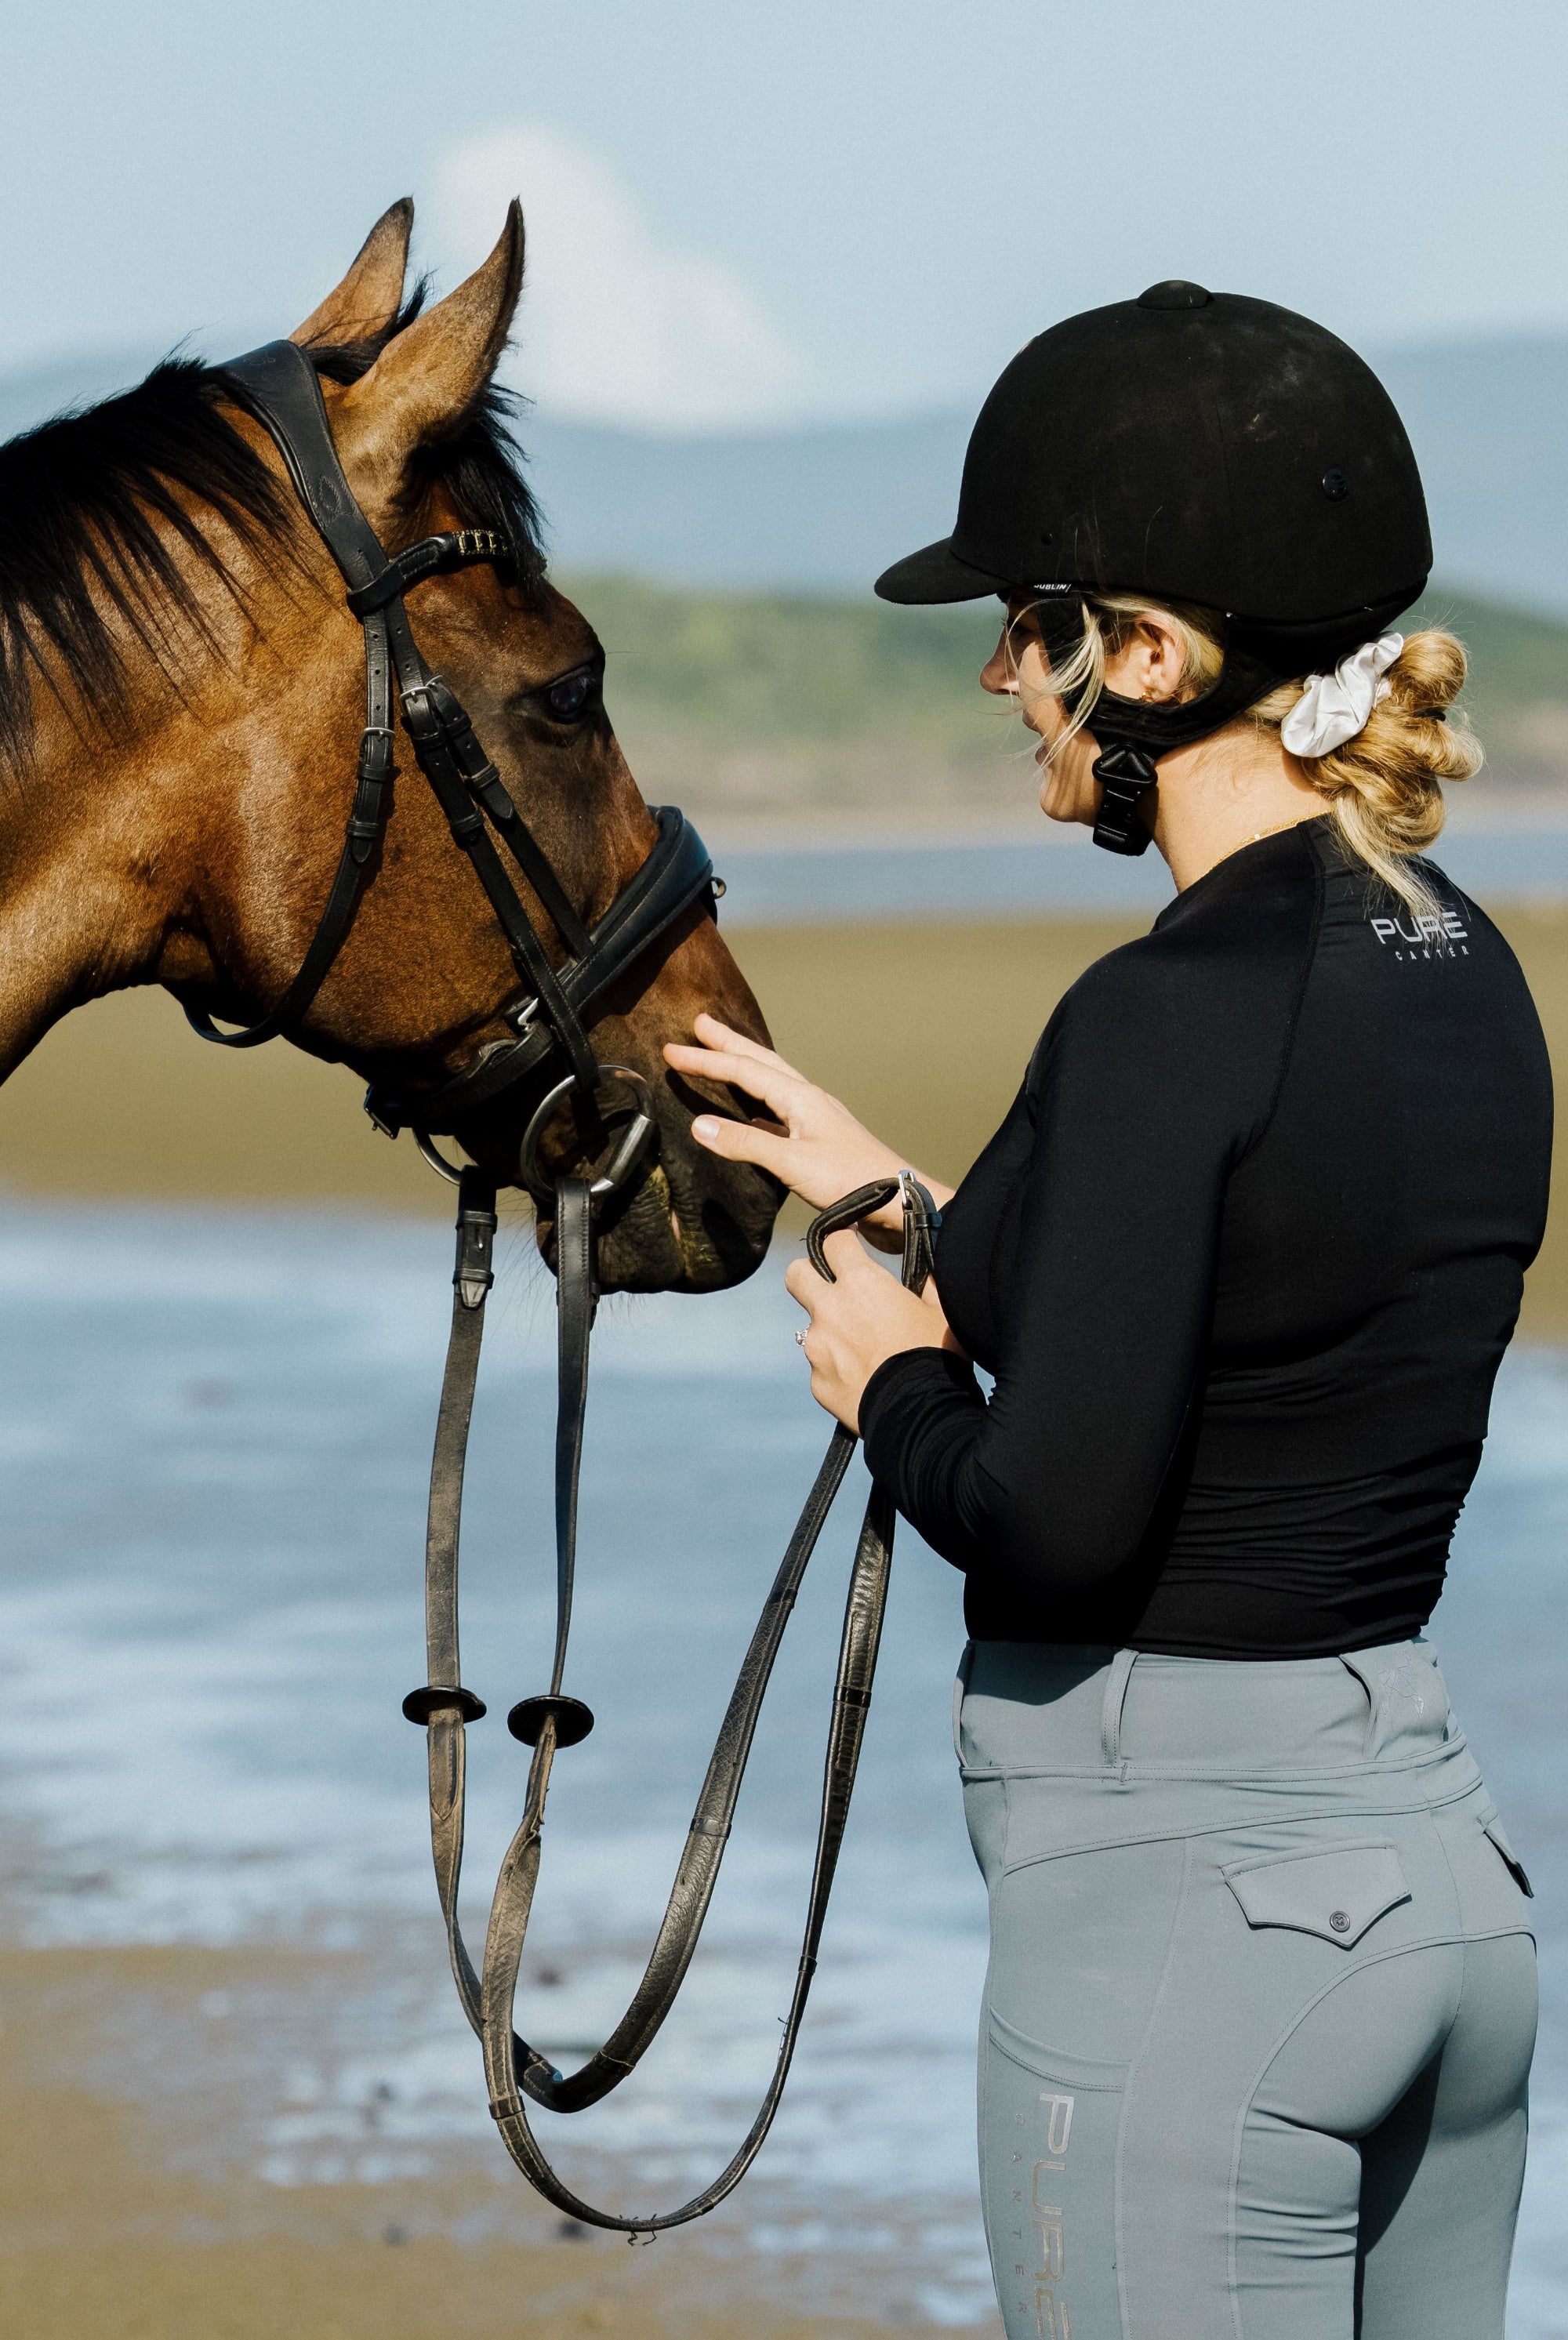 A close-up image of a rider wearing an equestrian base layer. The base layer is sleek and fitted, providing a comfortable and flexible foundation for riding attire.